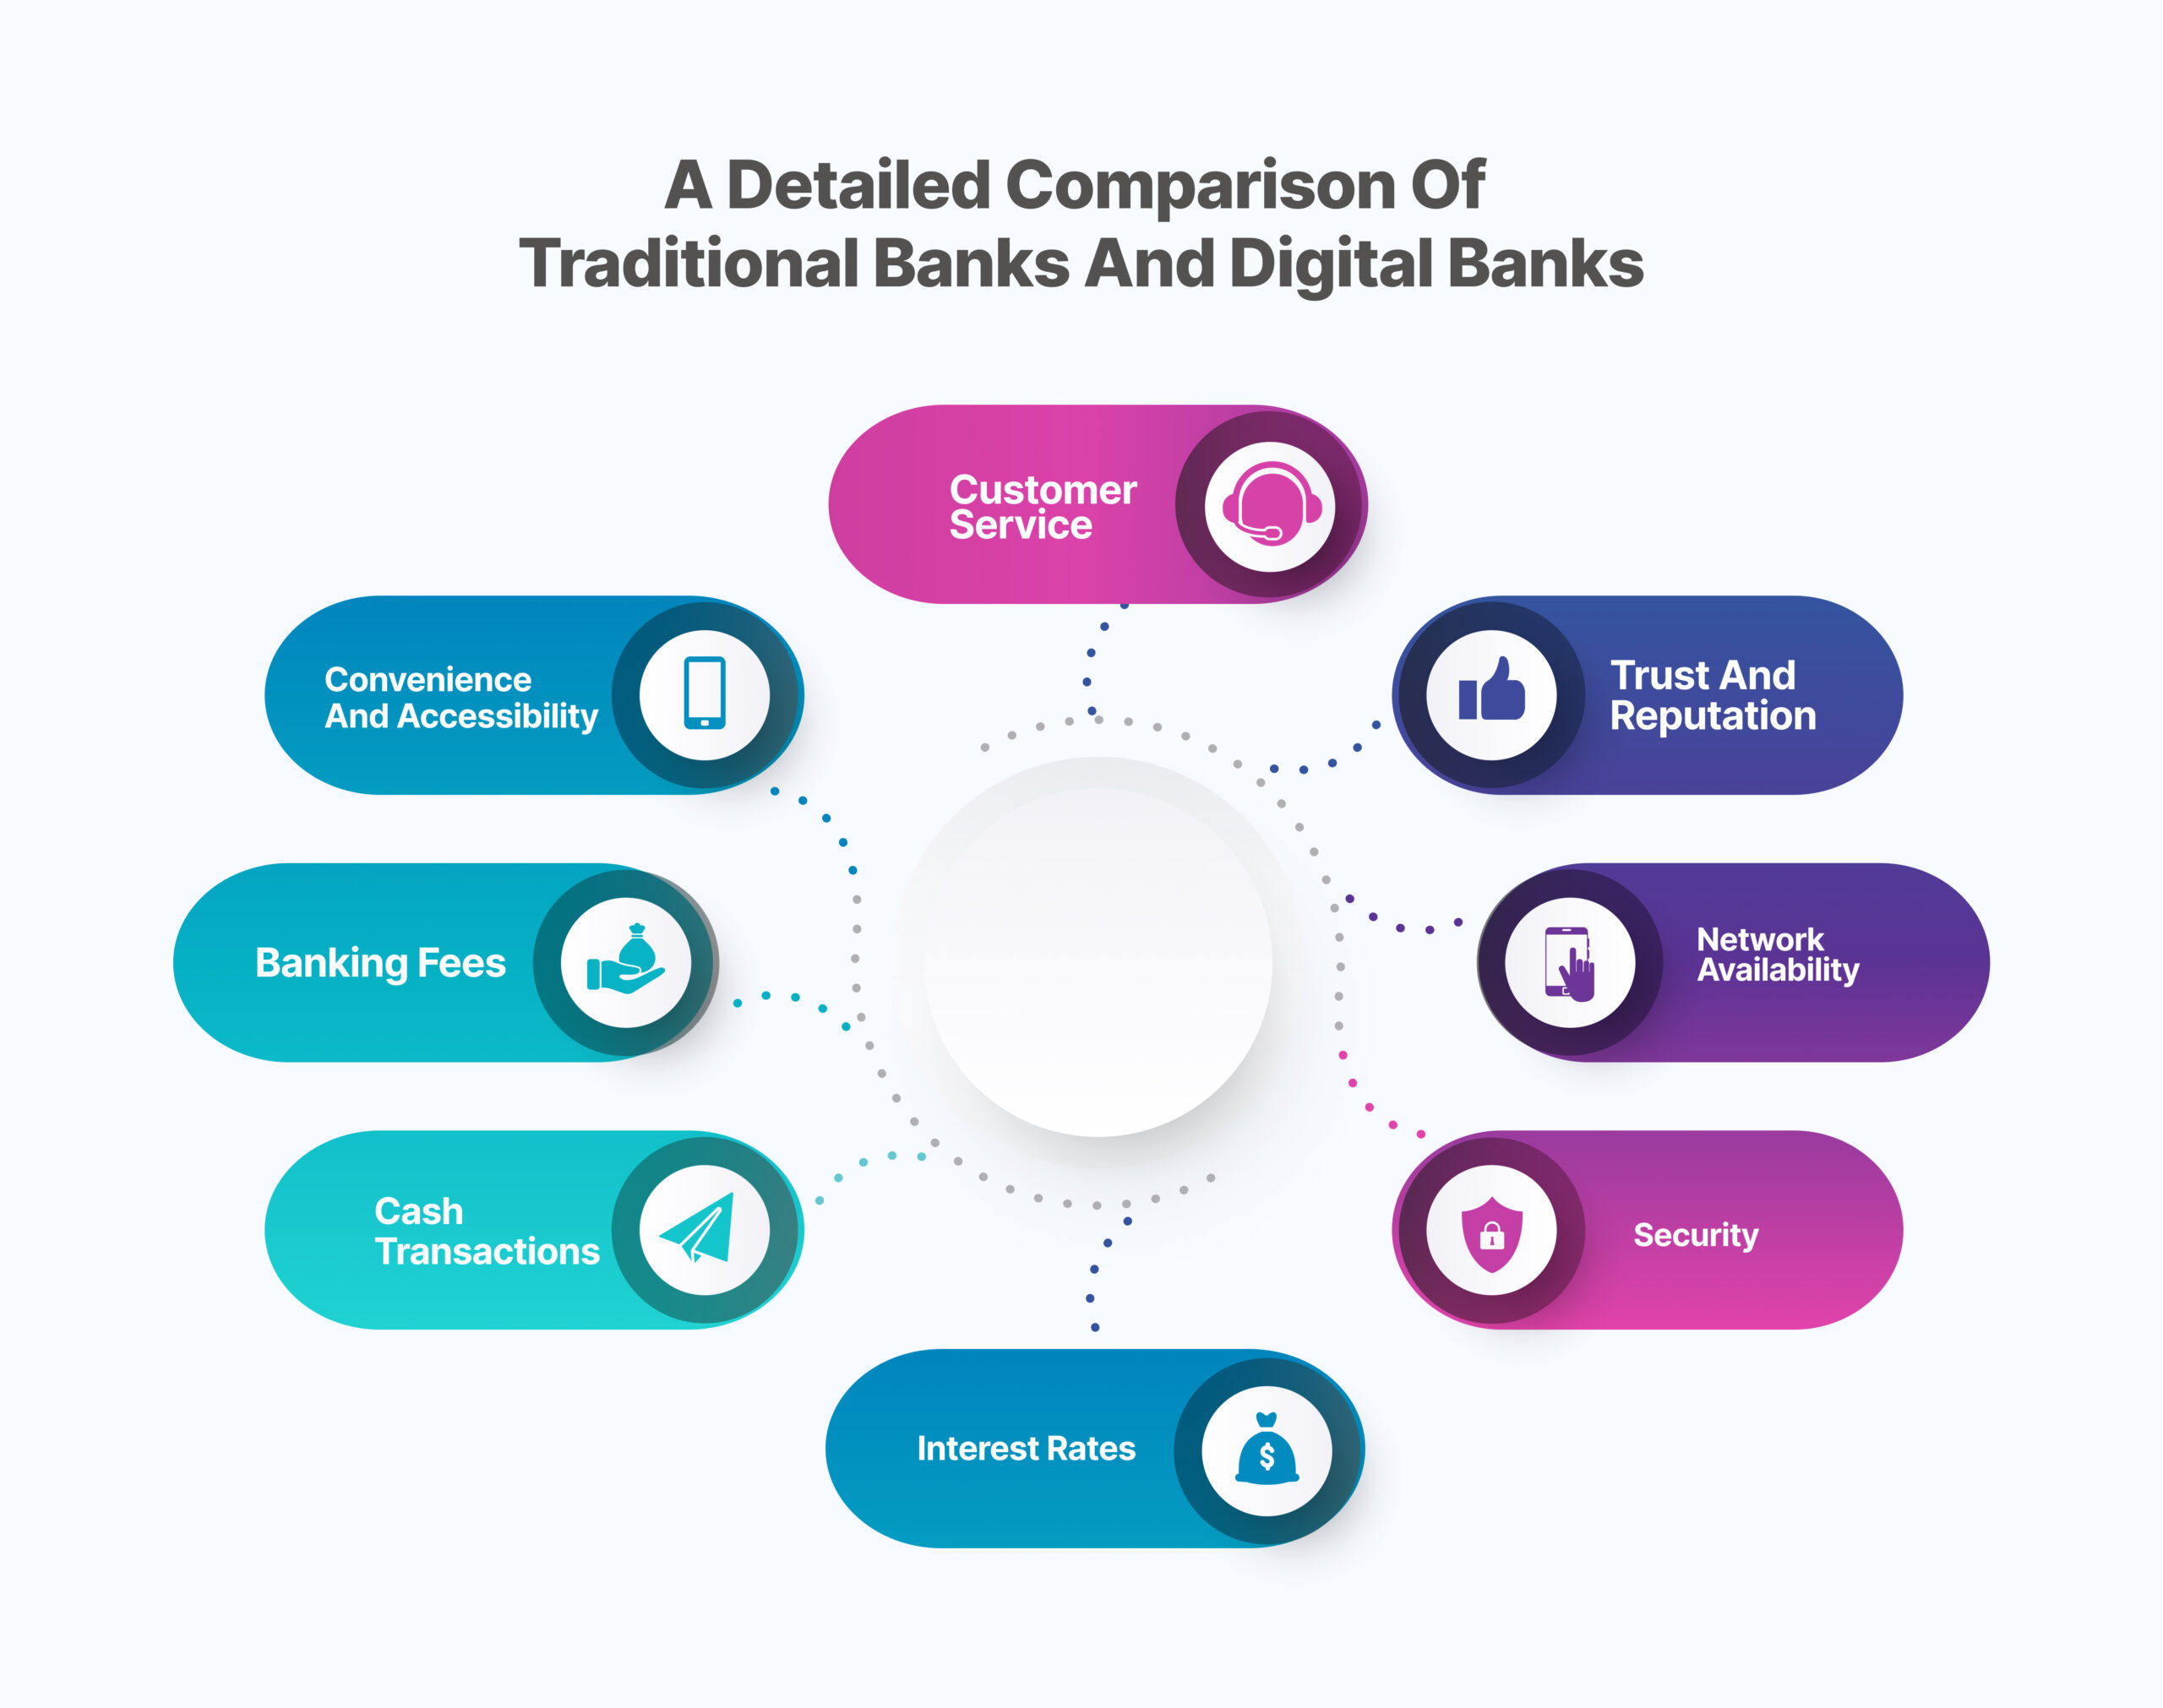 A Detailed Comparison of Traditional Banks and Digital Banks